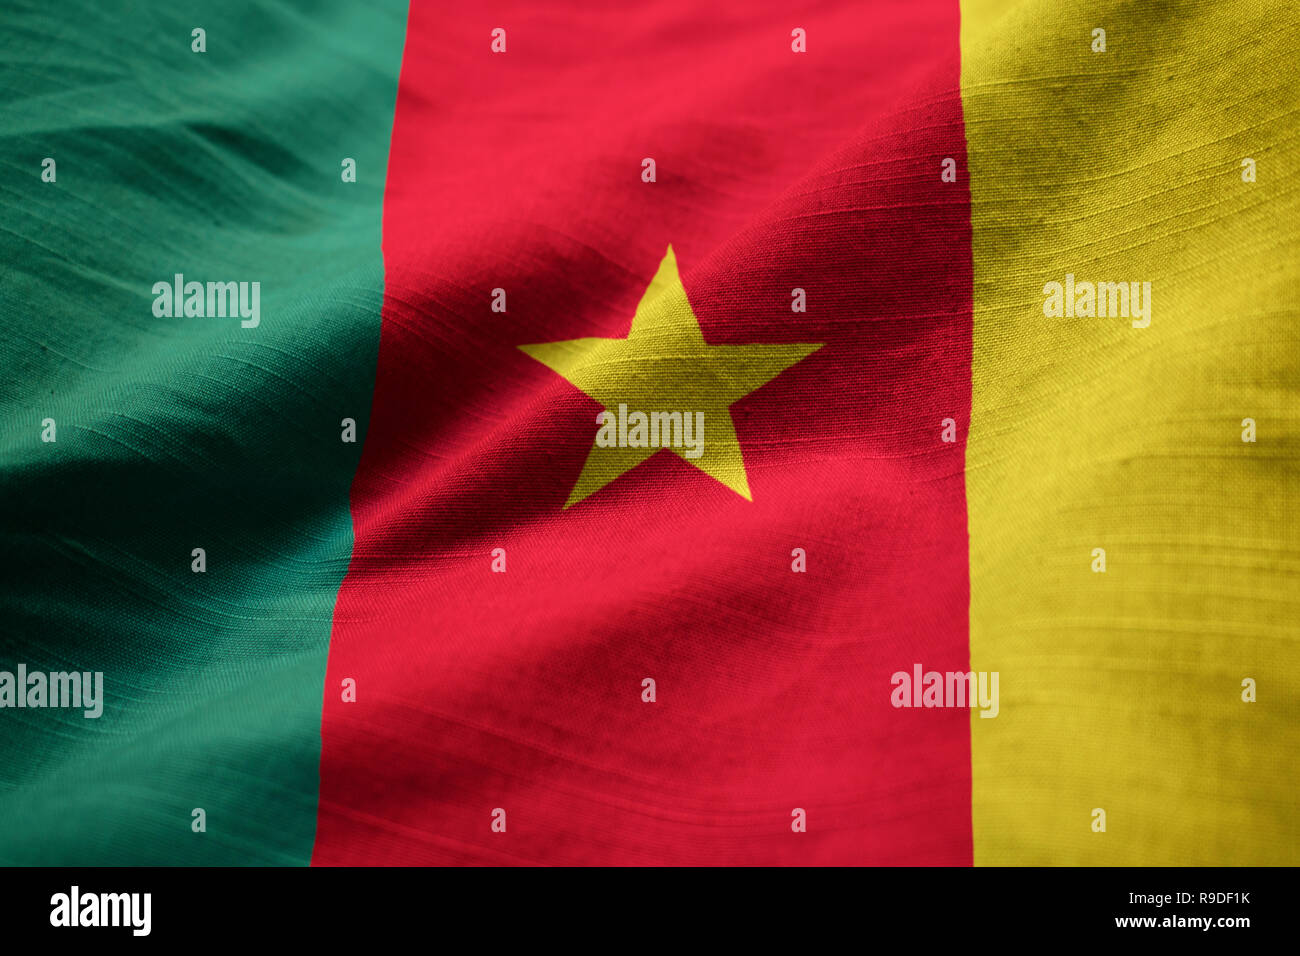 Closeup of Ruffled Cameroon Flag, Cameroon Flag Blowing in Wind Stock Photo